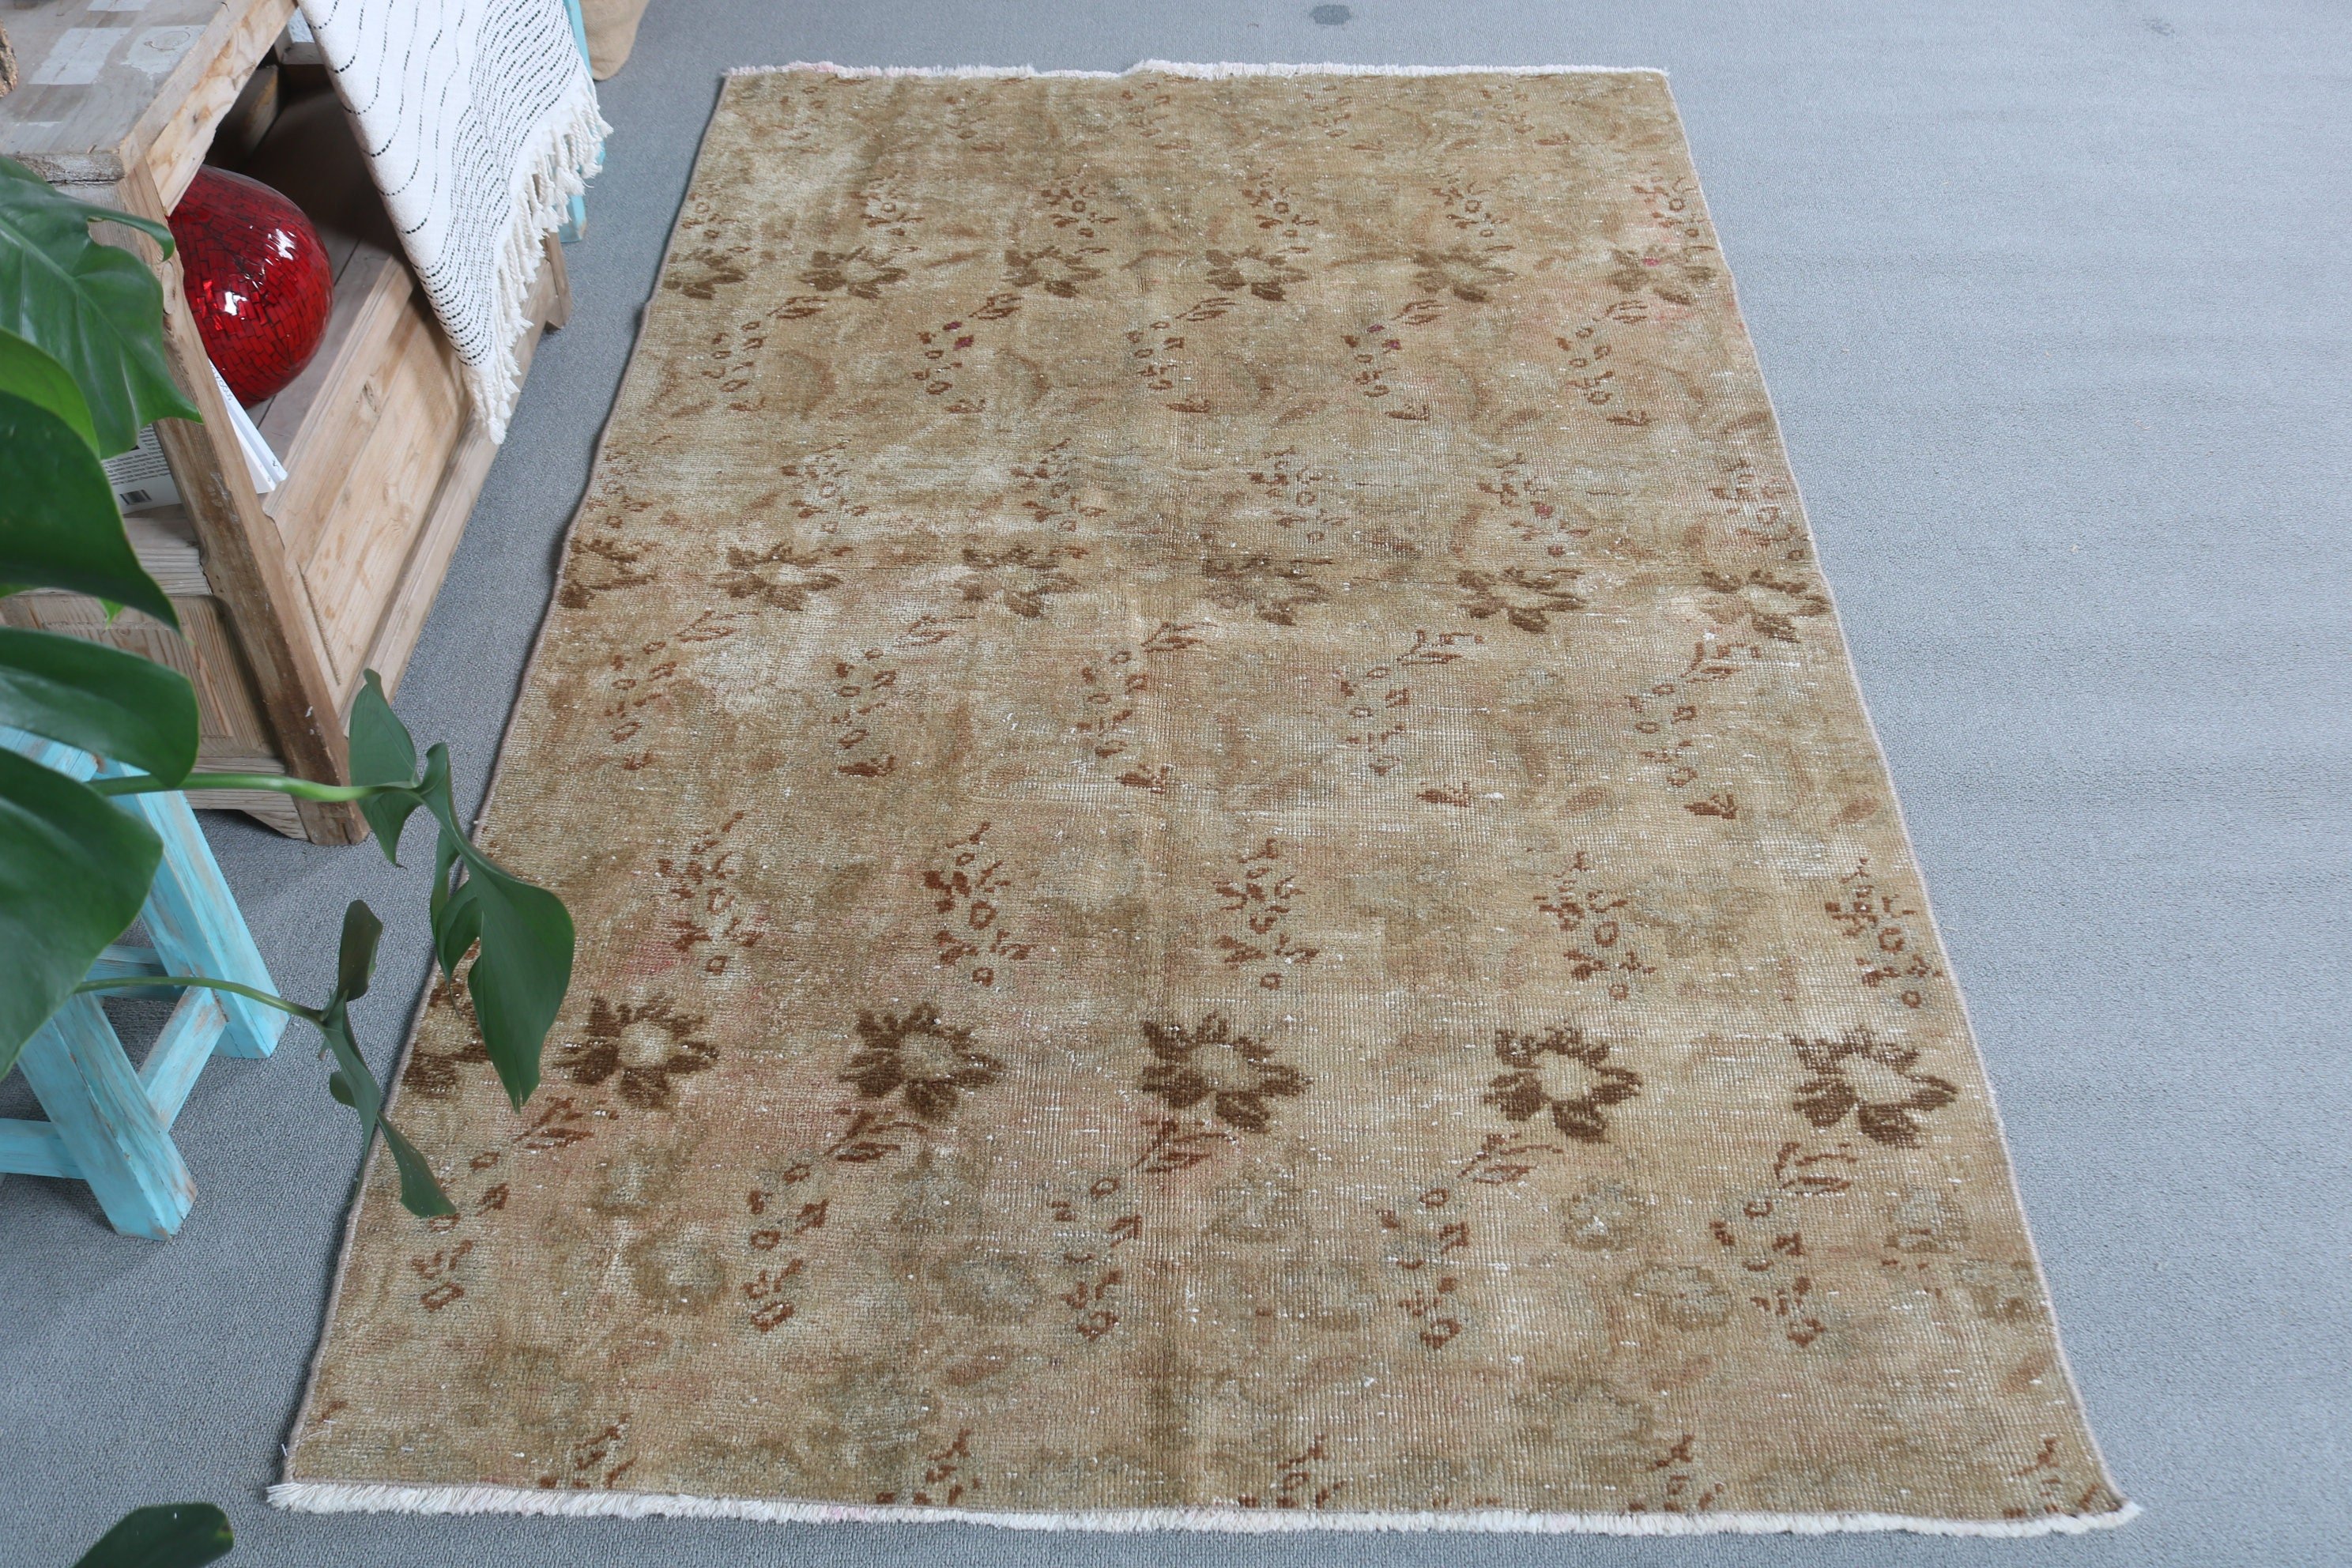 Vintage Rug, Kitchen Rug, 3.8x6.3 ft Accent Rugs, Wool Rugs, Turkish Rug, Old Rug, Cool Rug, Rugs for Entry, Brown Oriental Rugs, Entry Rug